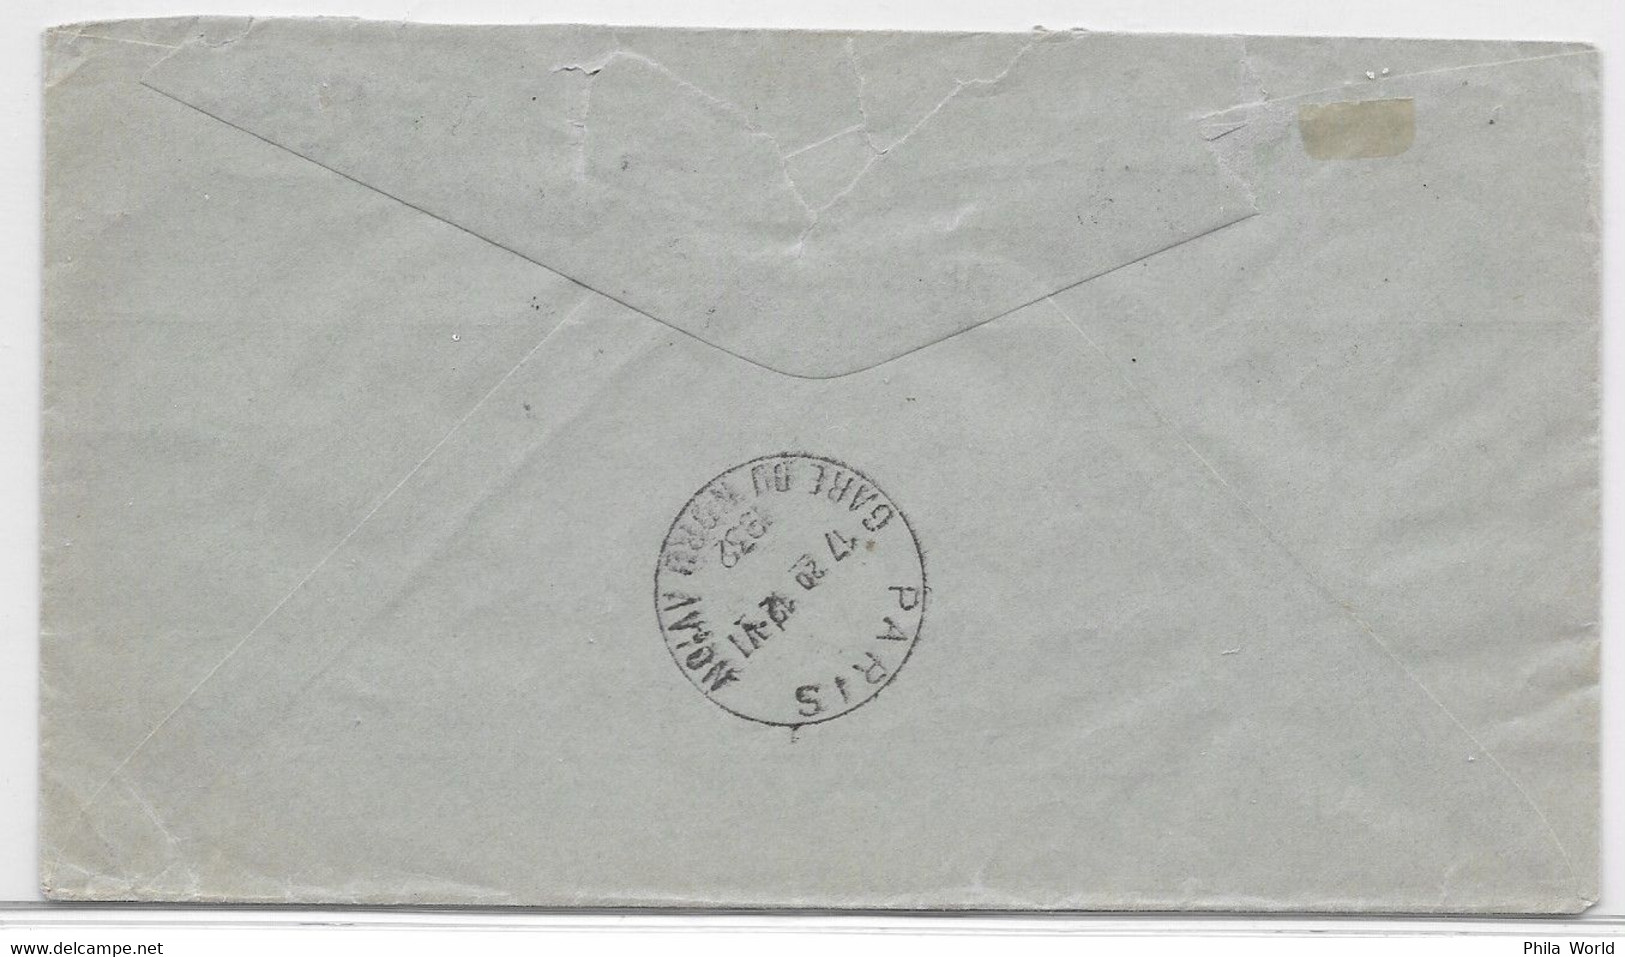 SERVICIO AEREO LINEAS CAT - 1932 MEXICO Air Mail Cover To Frankfurt GERMANY Via PARIS + LABEL And MIT LUFTPOST BEFORDET - Flugzeuge